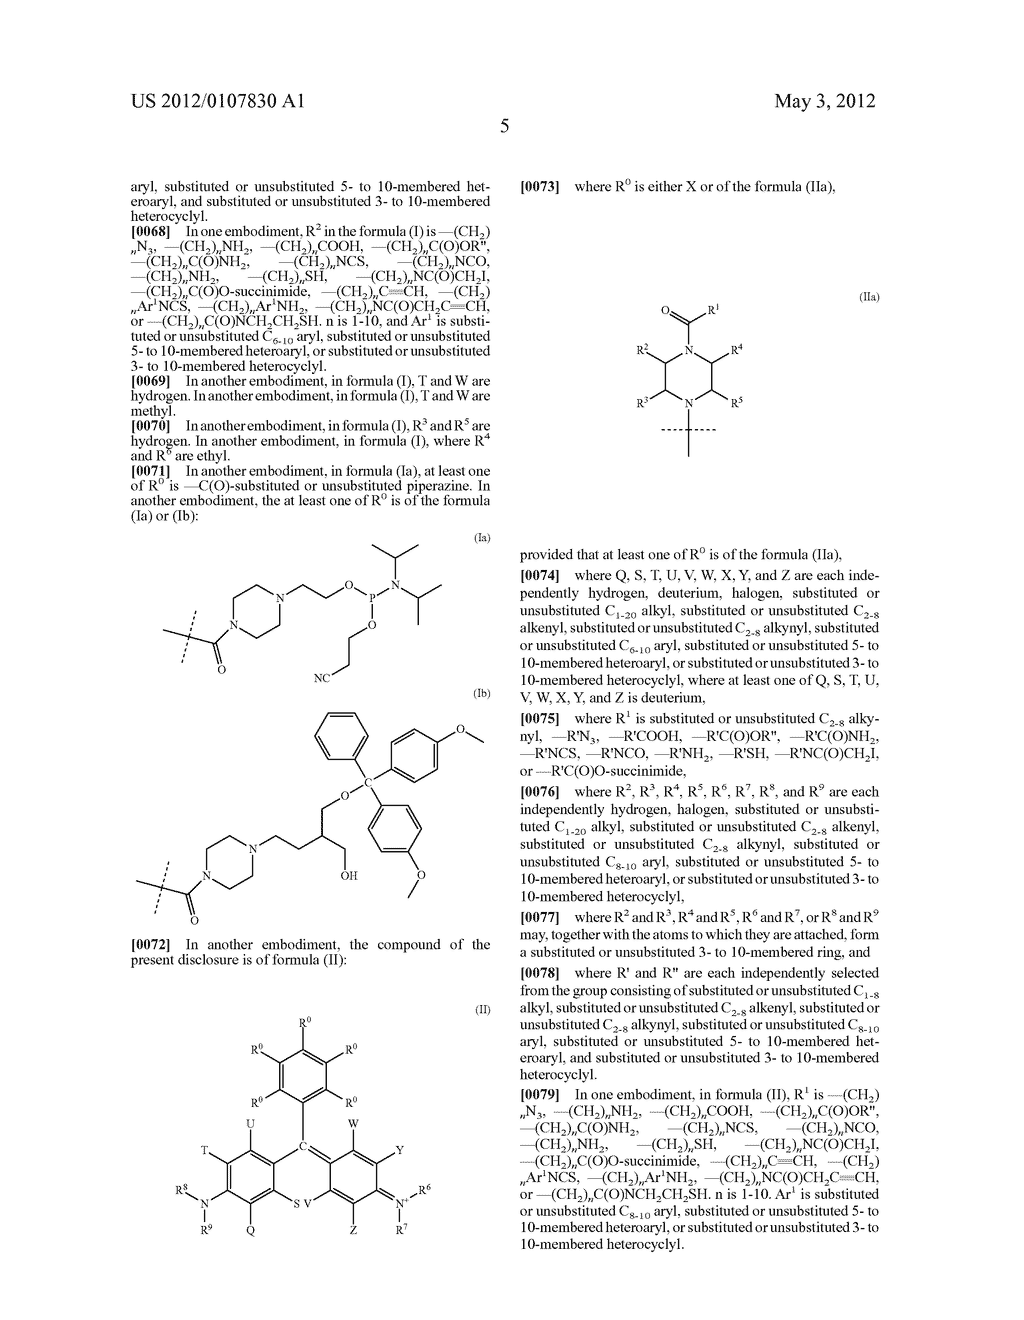 REAGENTS FOR BIOMOLECULAR LABELING, DETECTION AND QUANTIFICATION EMPLOYING     RAMAN SPECTROSCOPY - diagram, schematic, and image 22